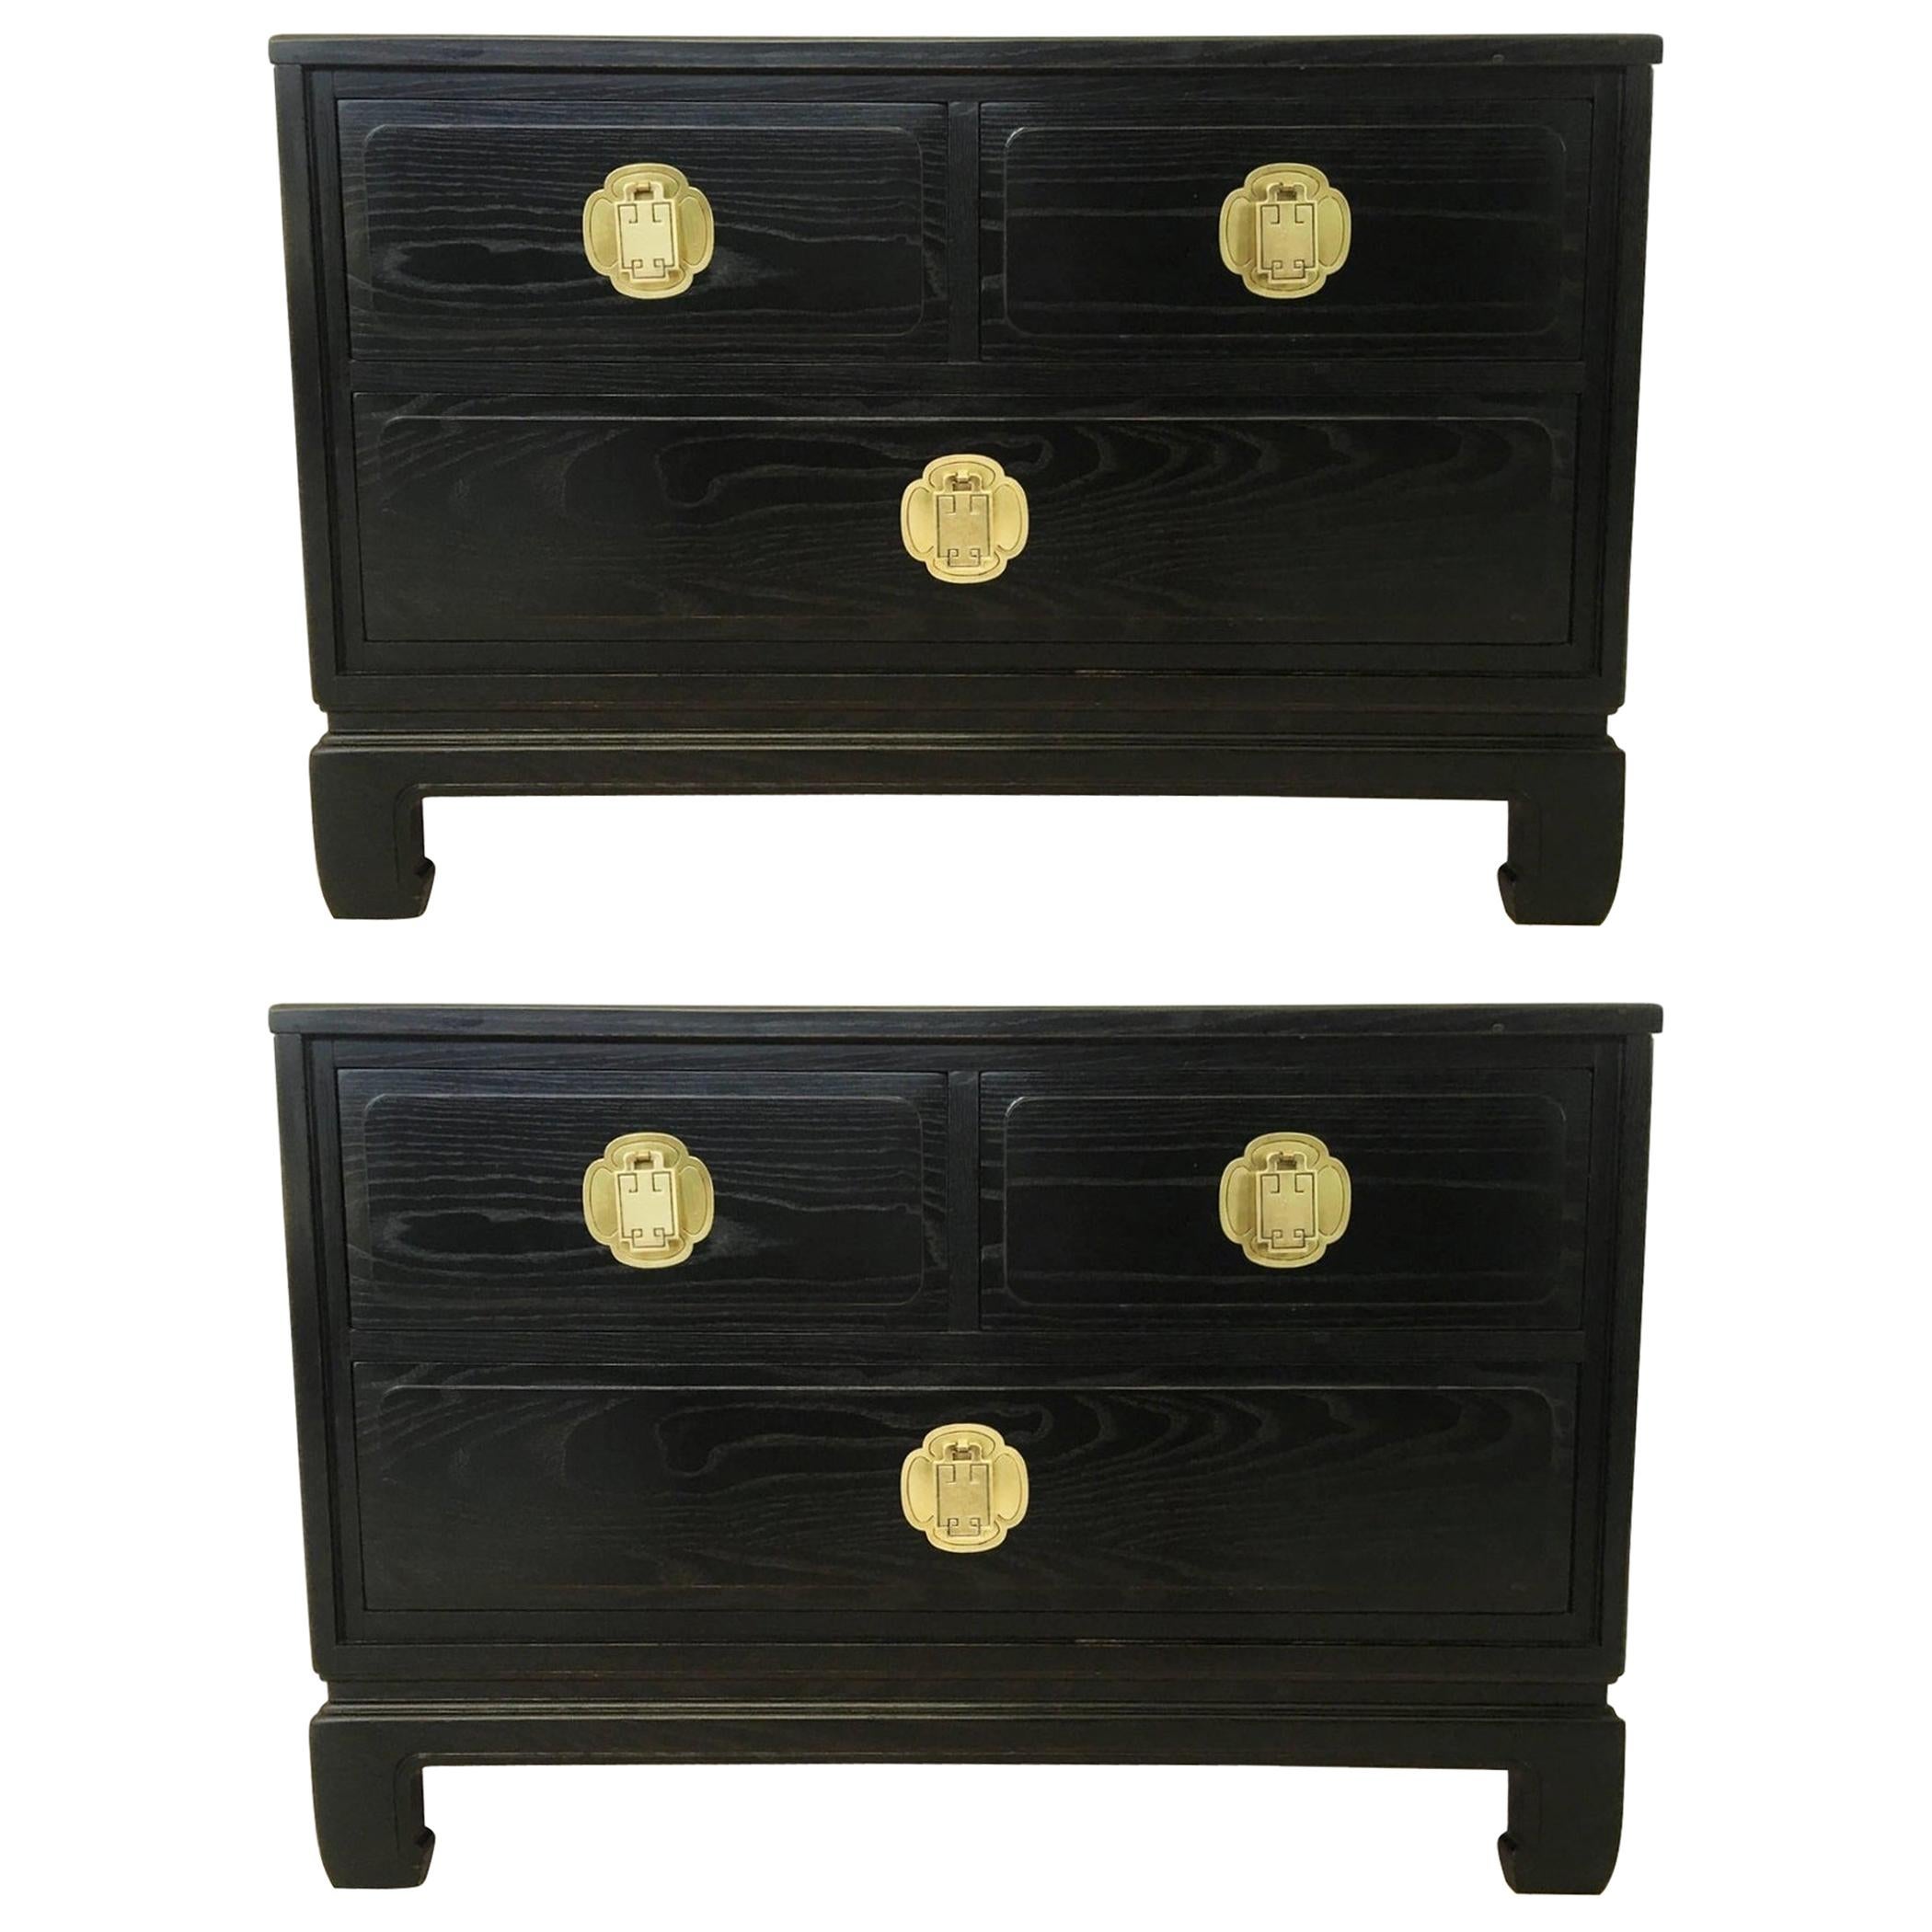 Pair of Cerused Oak Nightstands or End Tables by Davis Furniture Co